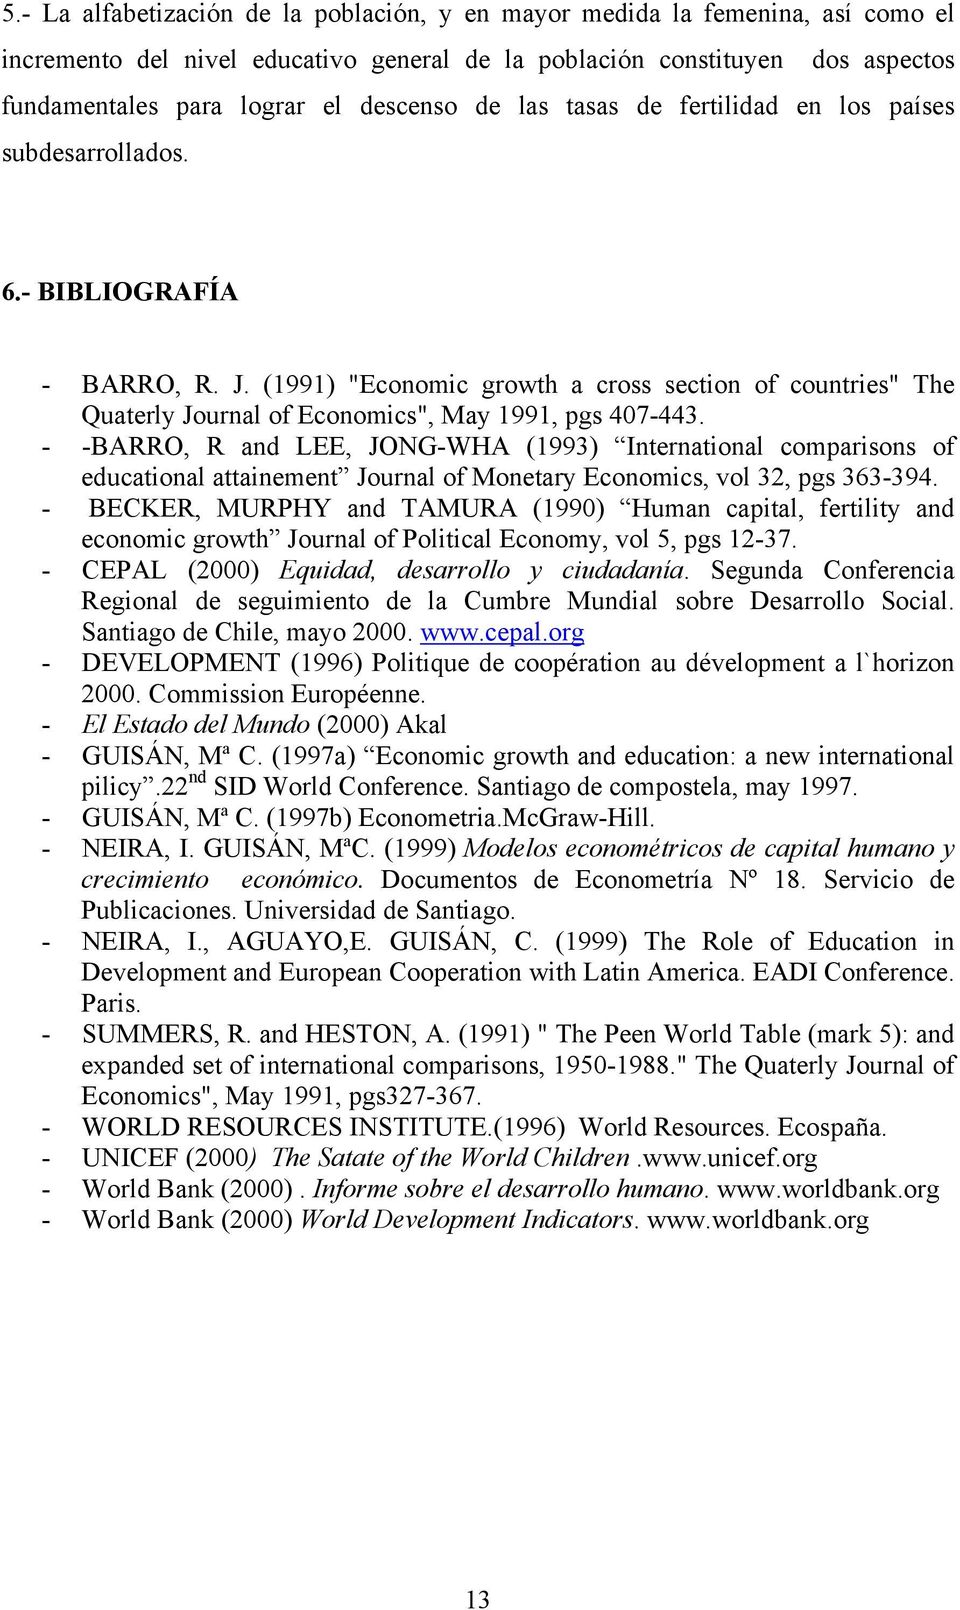 (1991) "Economic growth a cross section of countries" The Quaterly Journal of Economics", May 1991, pgs 407-443.